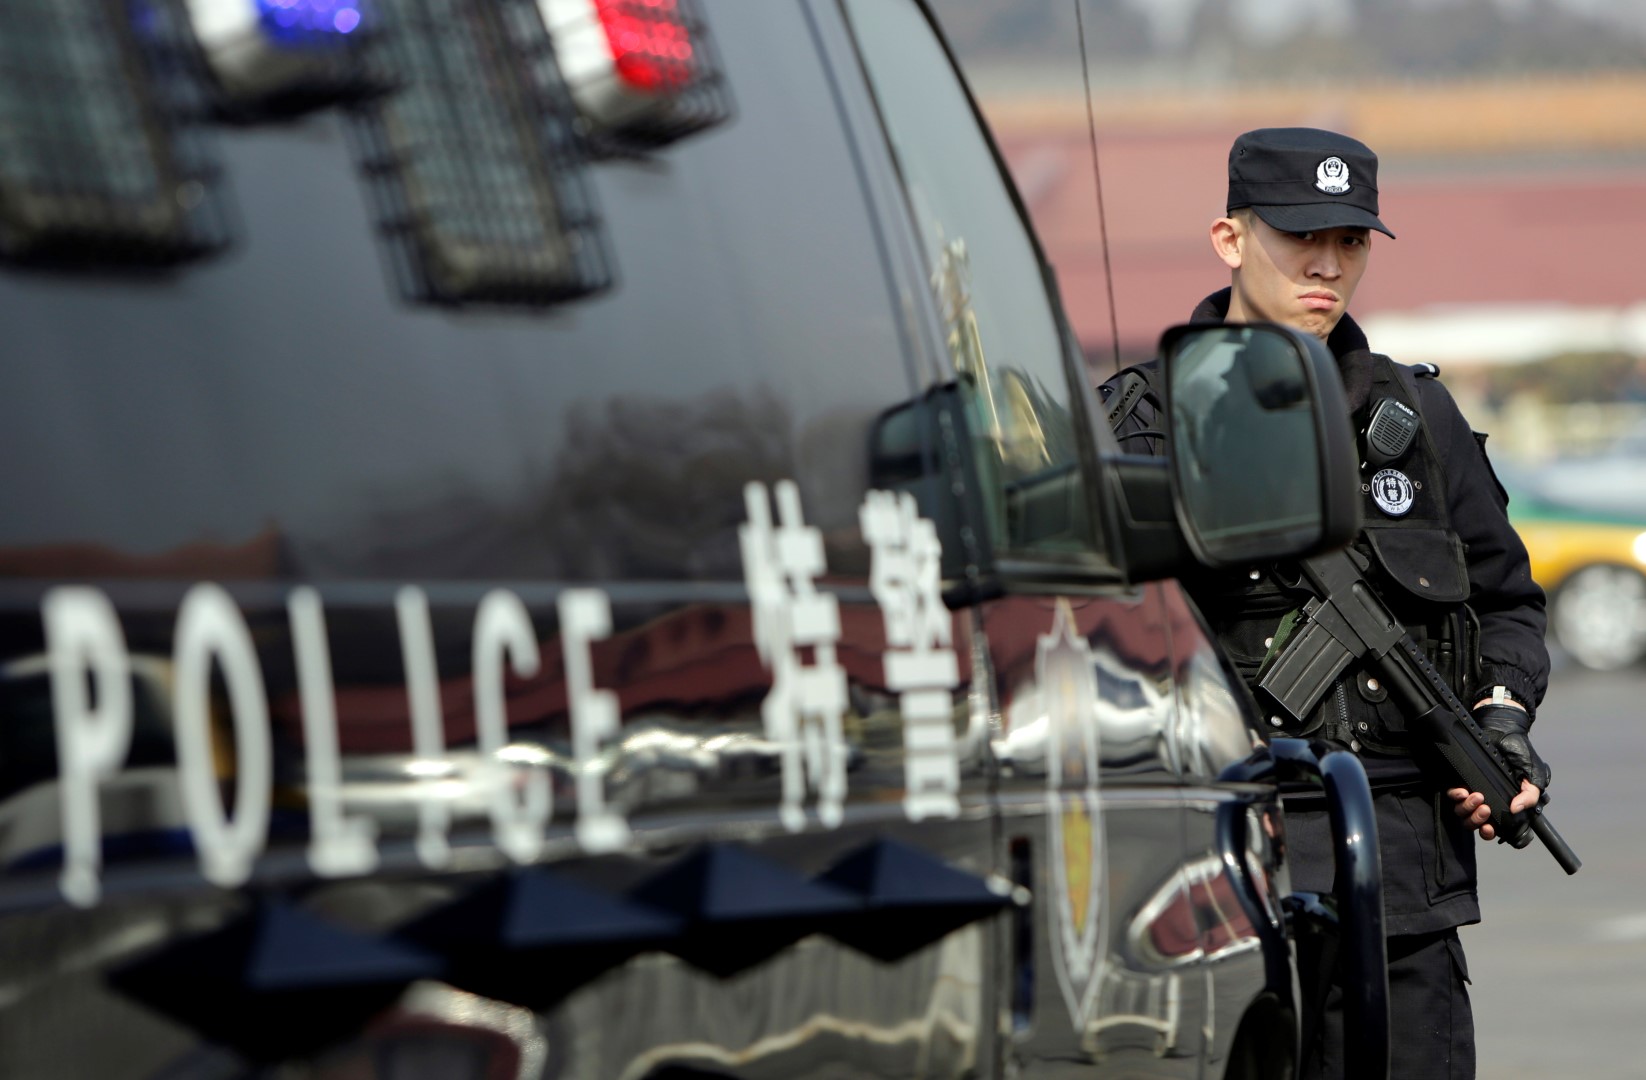 A policeman stands guard next to a vehicle of the Special Weapons and Tactics (SWAT) team on the Chang'an Avenue in front of the Tiananmen Square in Beijing ahead of the opening of the Chinese People's Political Consultative Conference (CPPCC), March 2, 2014. REUTERS/Jason Lee (CHINA - Tags: POLITICS MILITARY) - RTR3FW7J